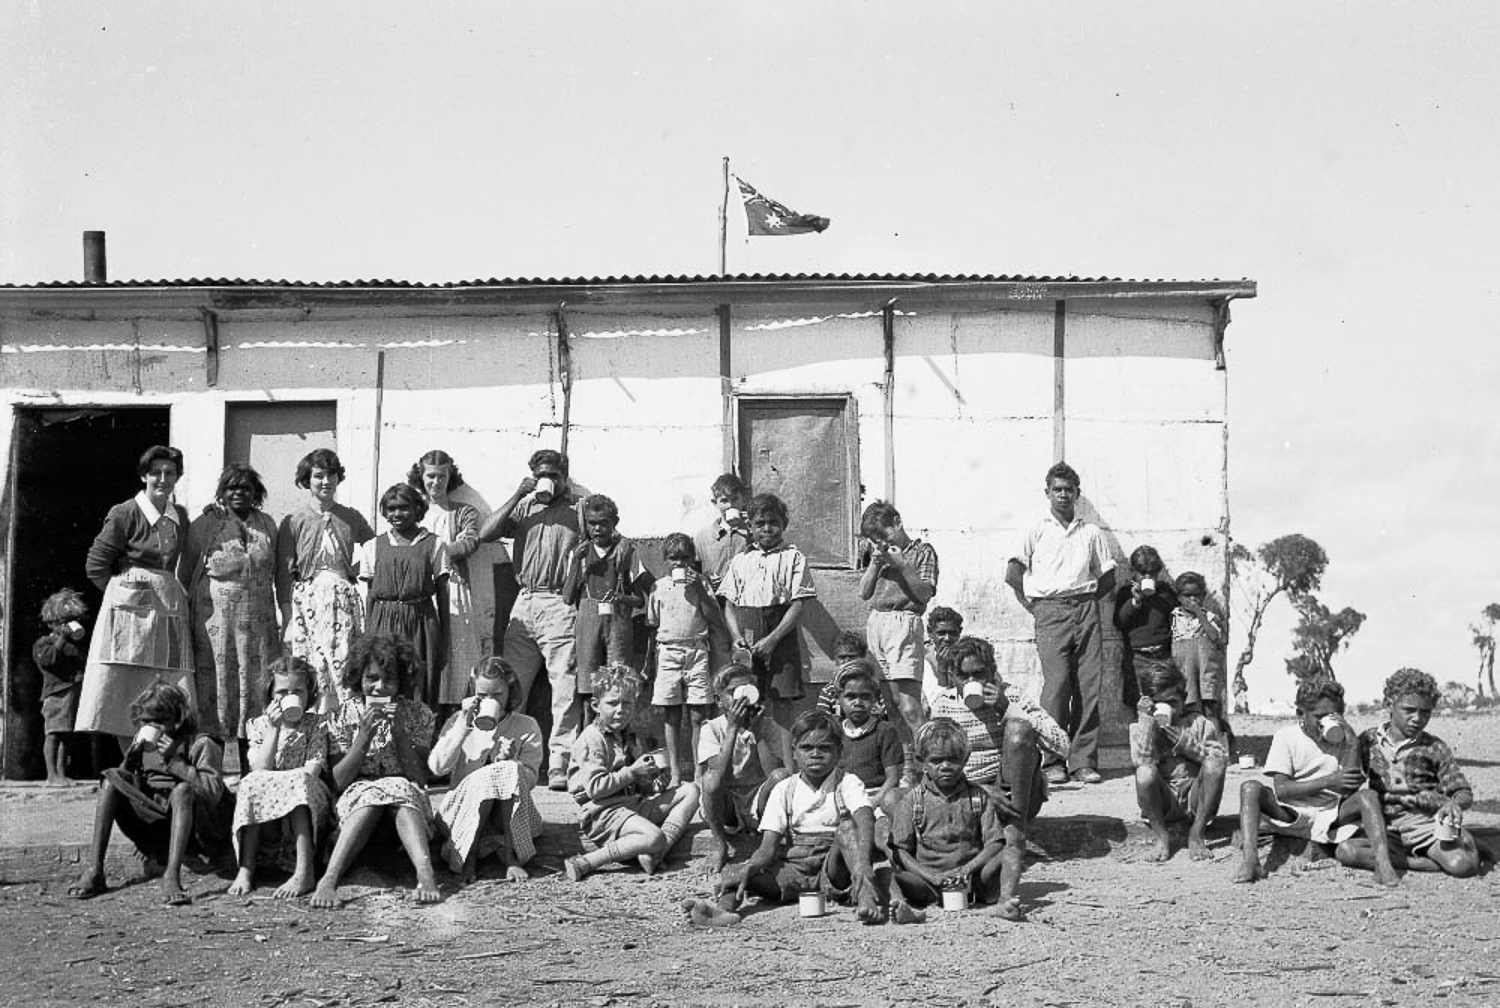 ‘Cocoa time’ at Cundeelee mission, outside the kitchen under the Australian flag. The Cundeelee mission would be eventually closed in 1985, and in 1986, elders would return to their original homelands on Spinifex Country to the east, and establish the community of Tjuntjuntjara.